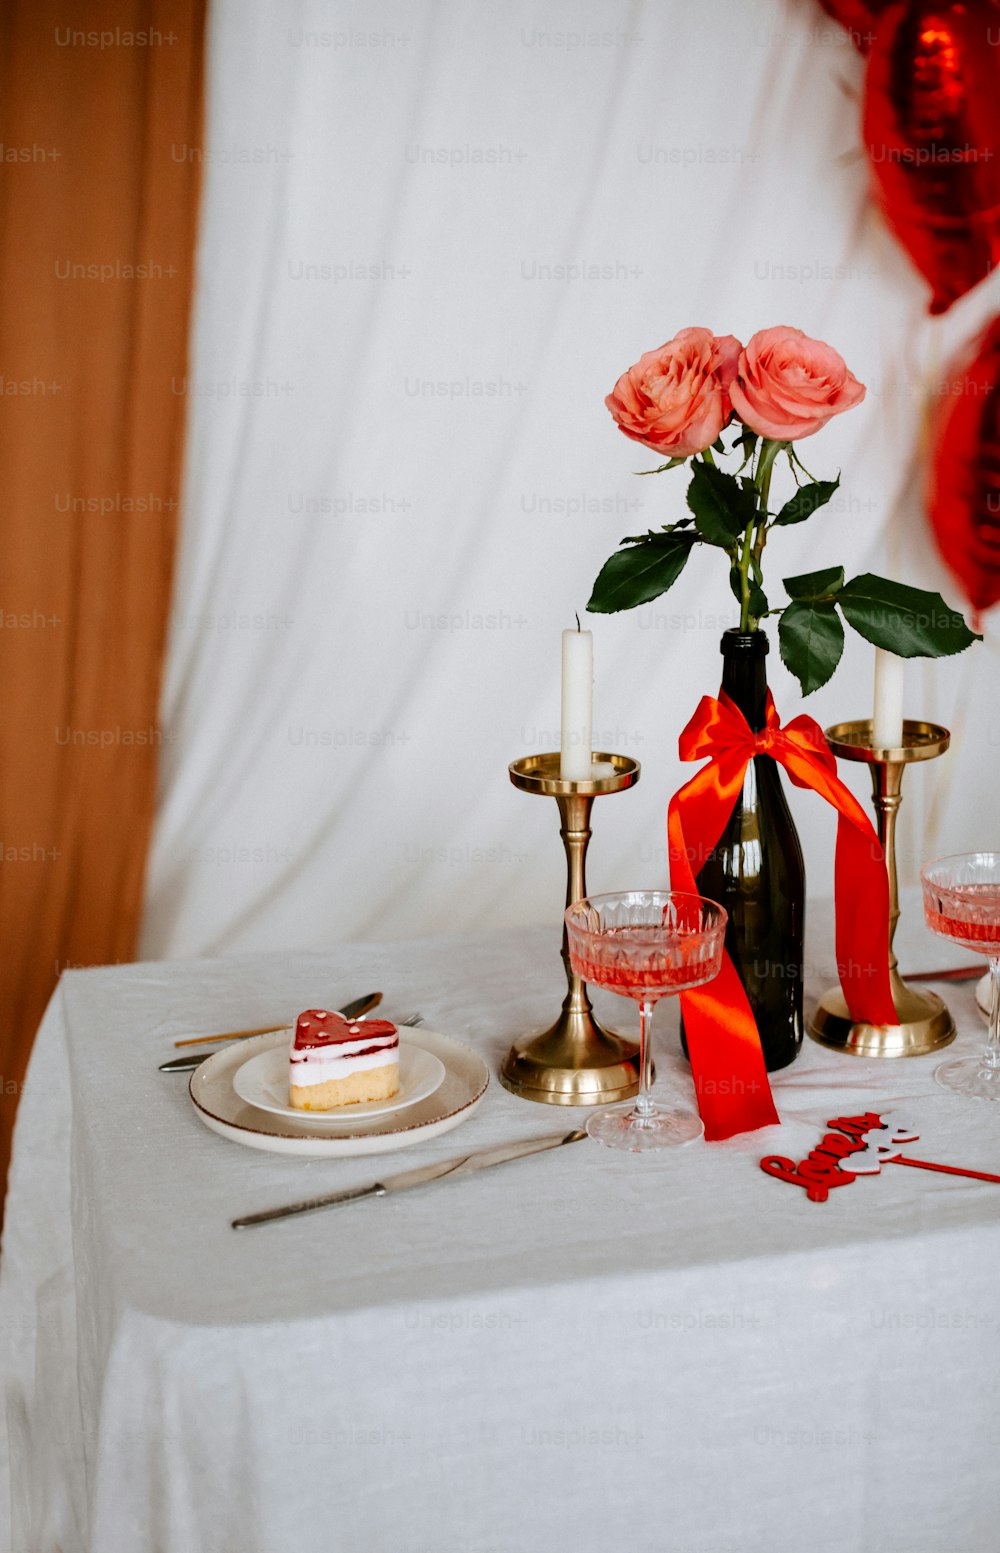 a table topped with a vase filled with roses